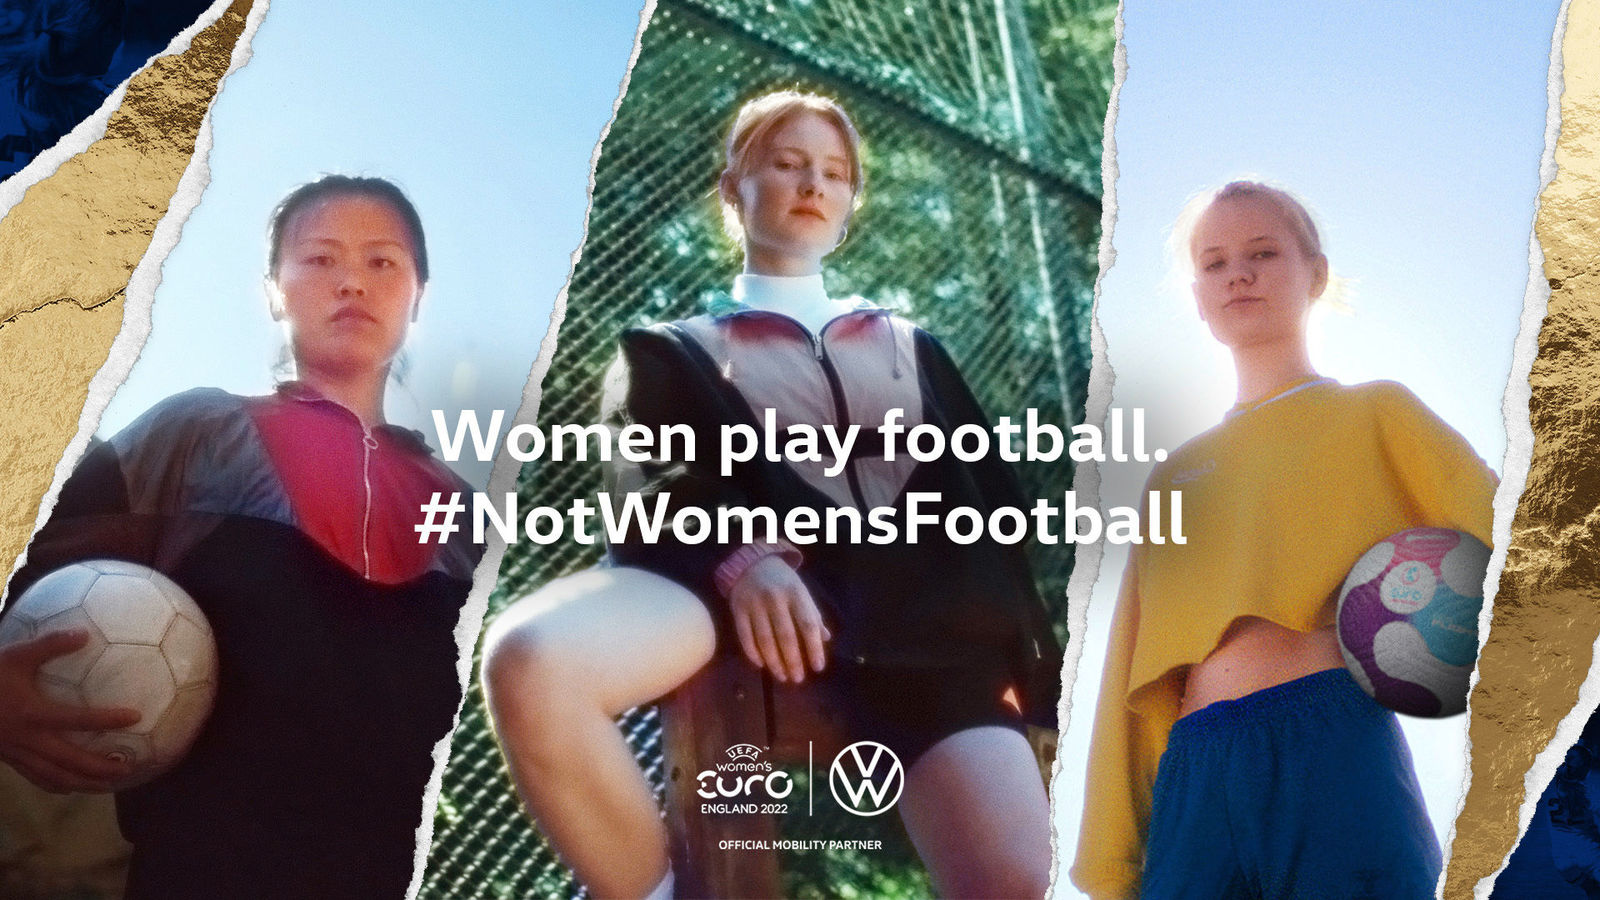 #NotWomensFootball: Volkswagen launches provocative campaign to increase gender equality as UEFA Women’s EURO 2022 kick off